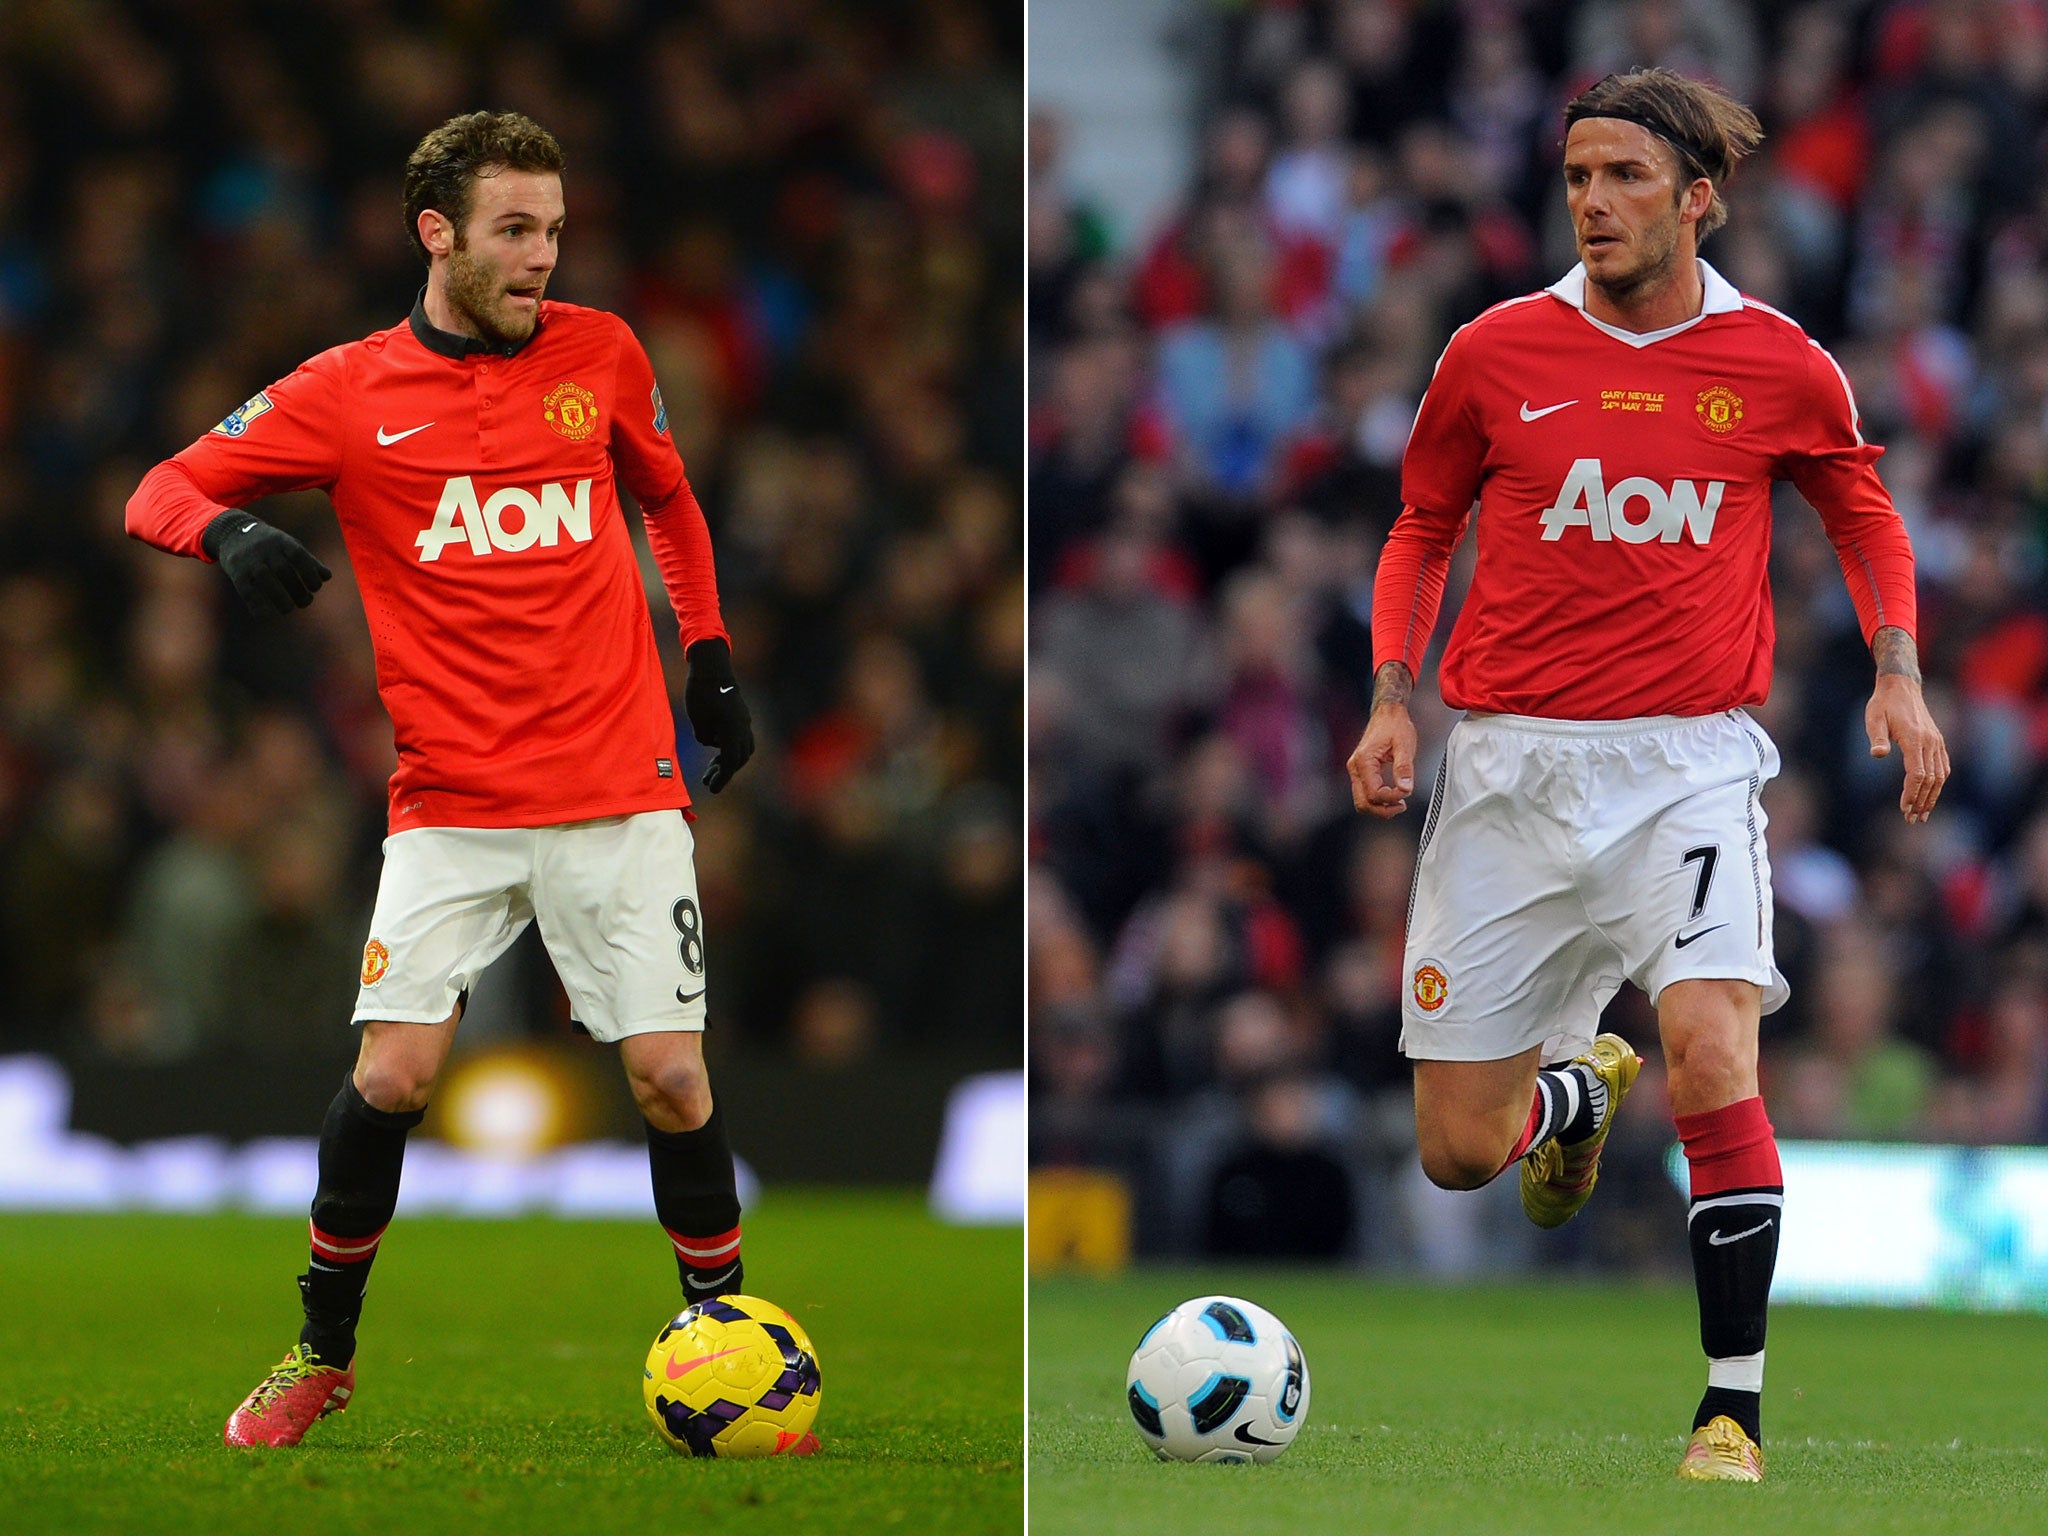 Juan Mata could go through a Manchester United initiation, but hopefully it won't be anything like David Beckham's